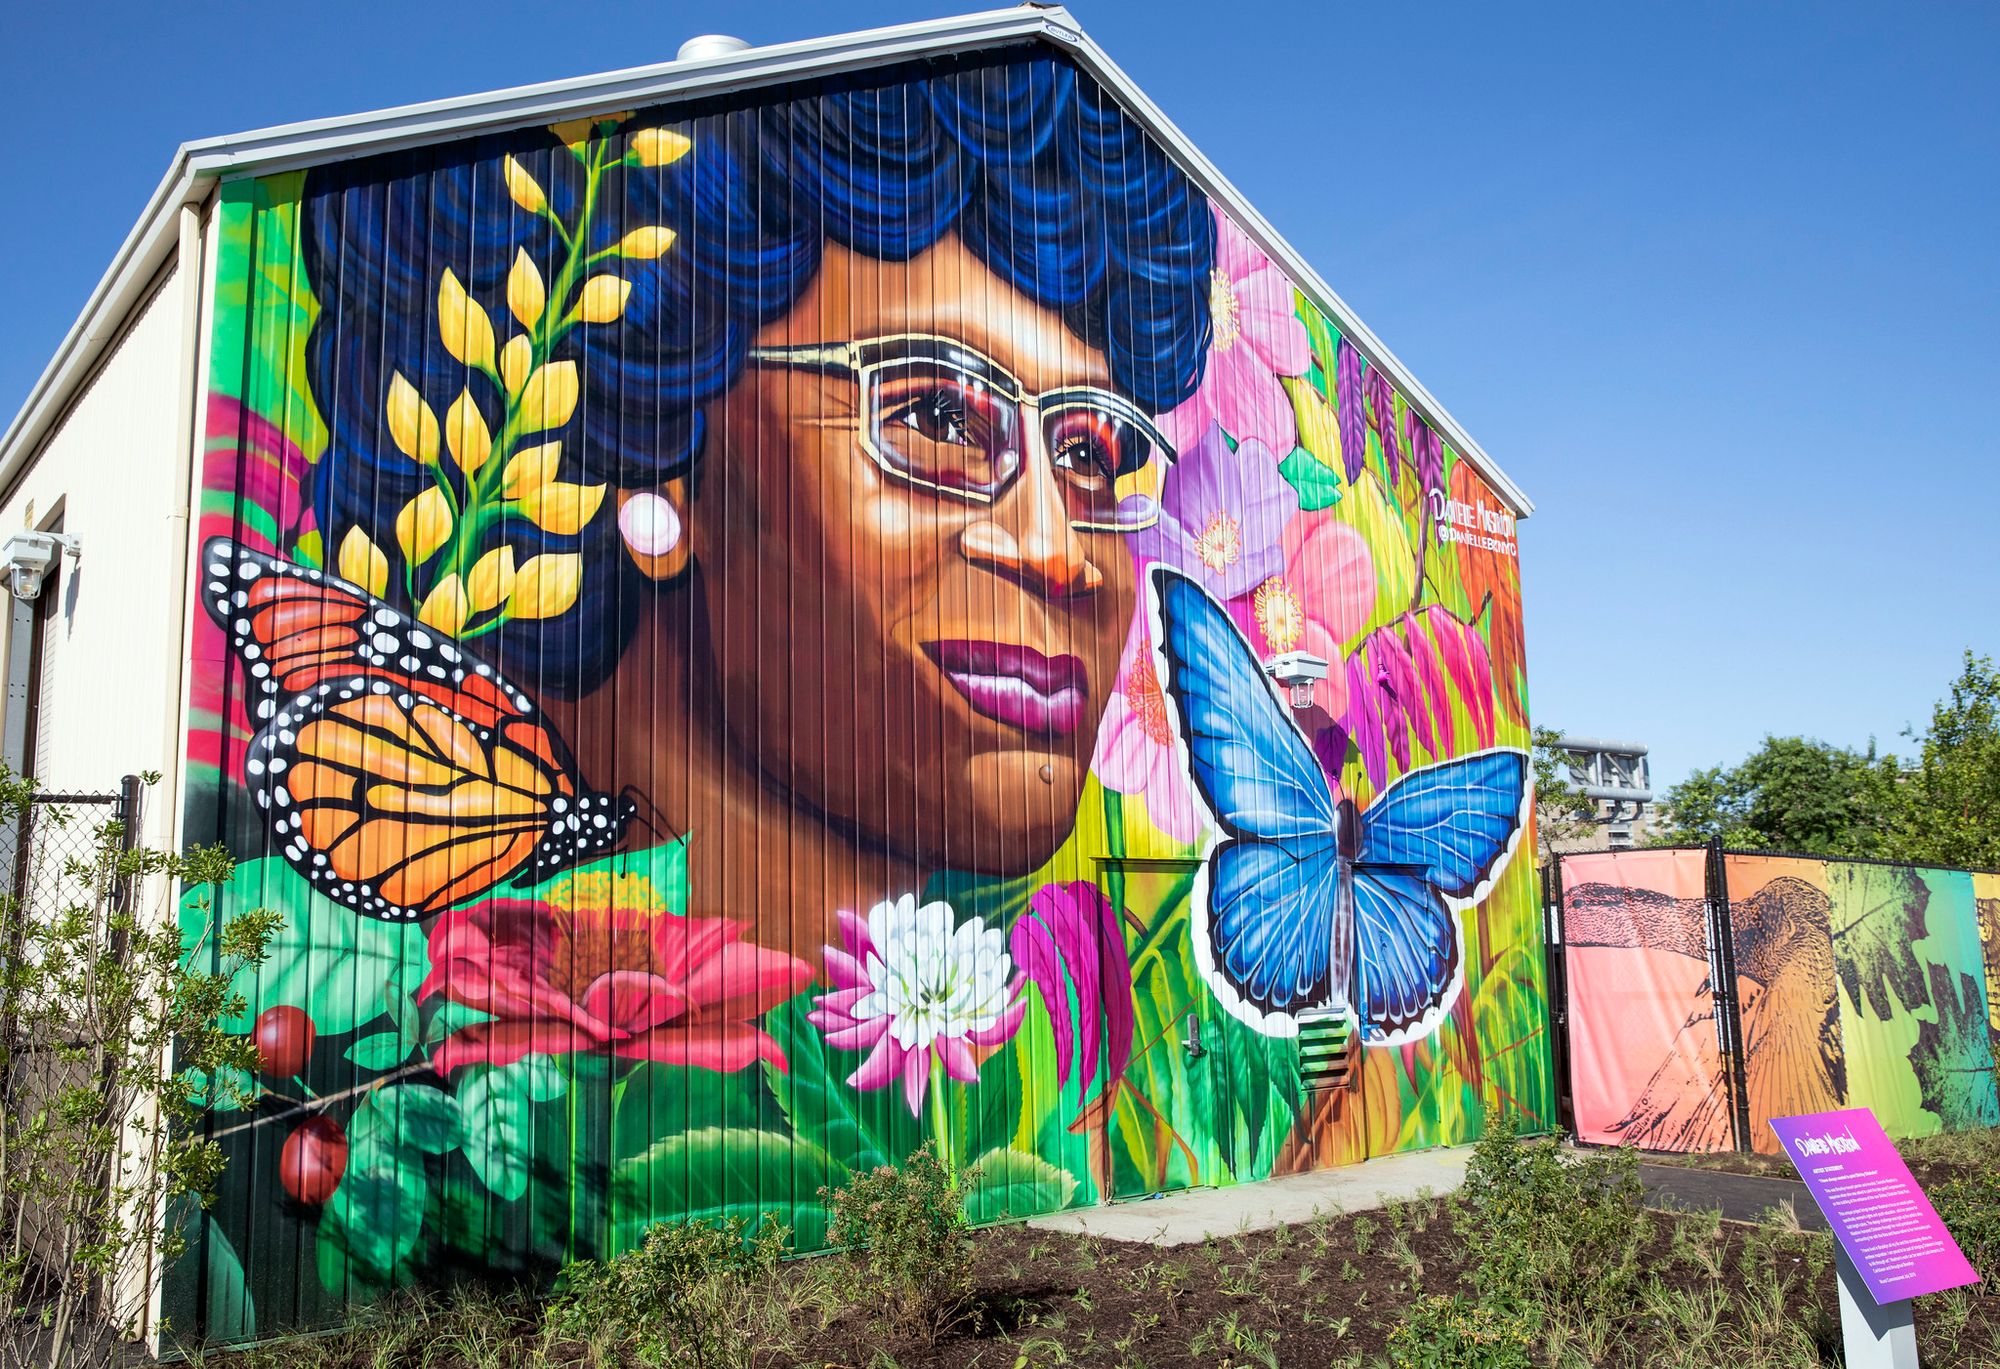 Shirley Chisholm State Park Opens In East New York